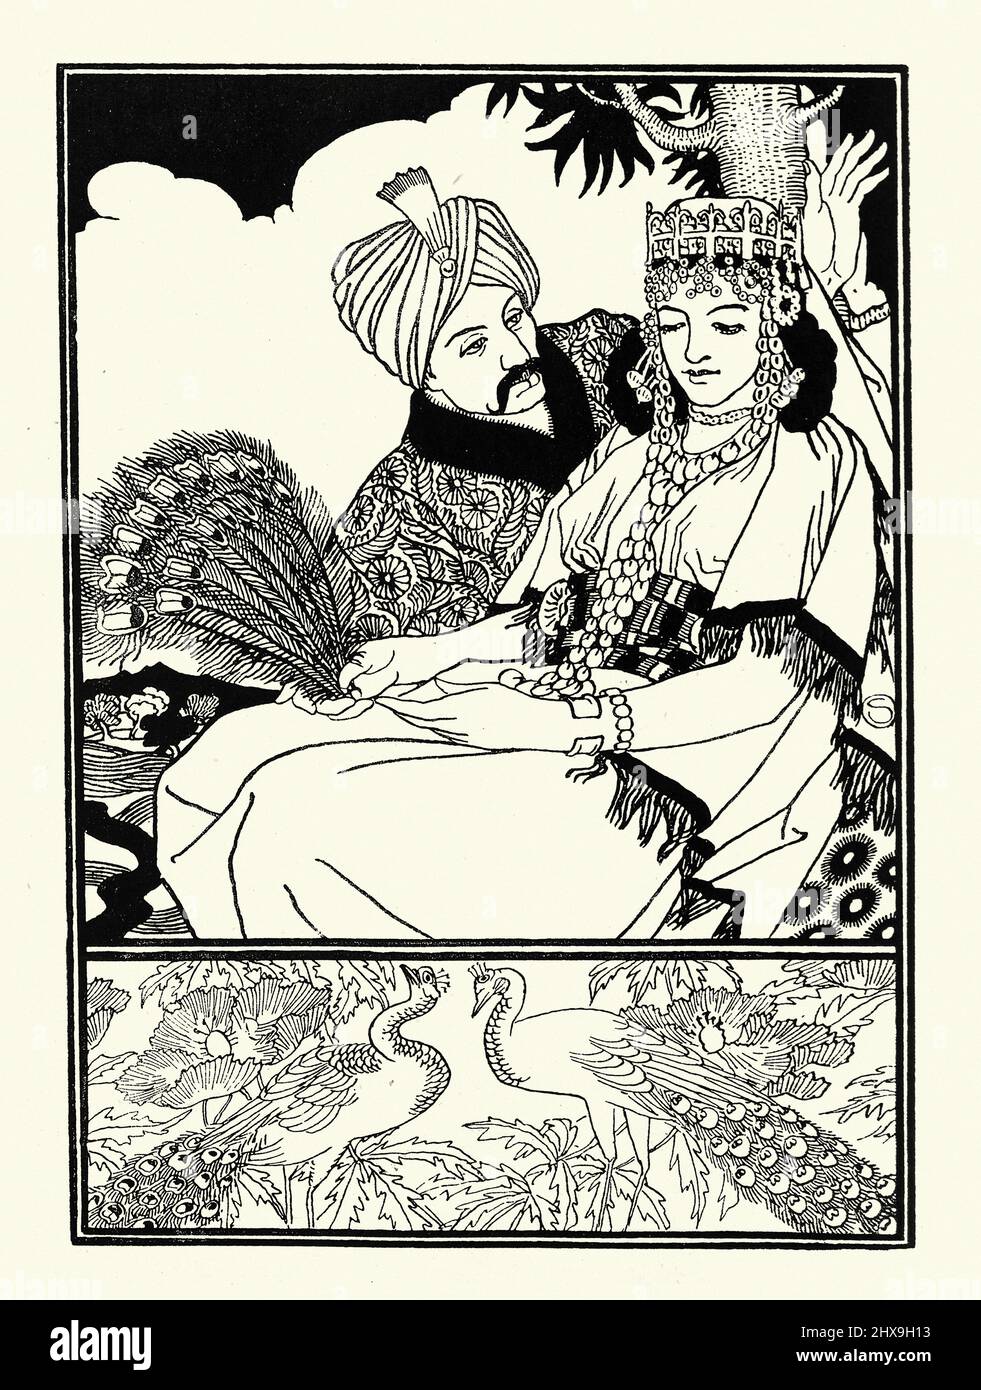 Vintage illustration from Fourth voyage of Sinbad the Sailor, Sinbad's wife, woman of noble birth. Stock Photo